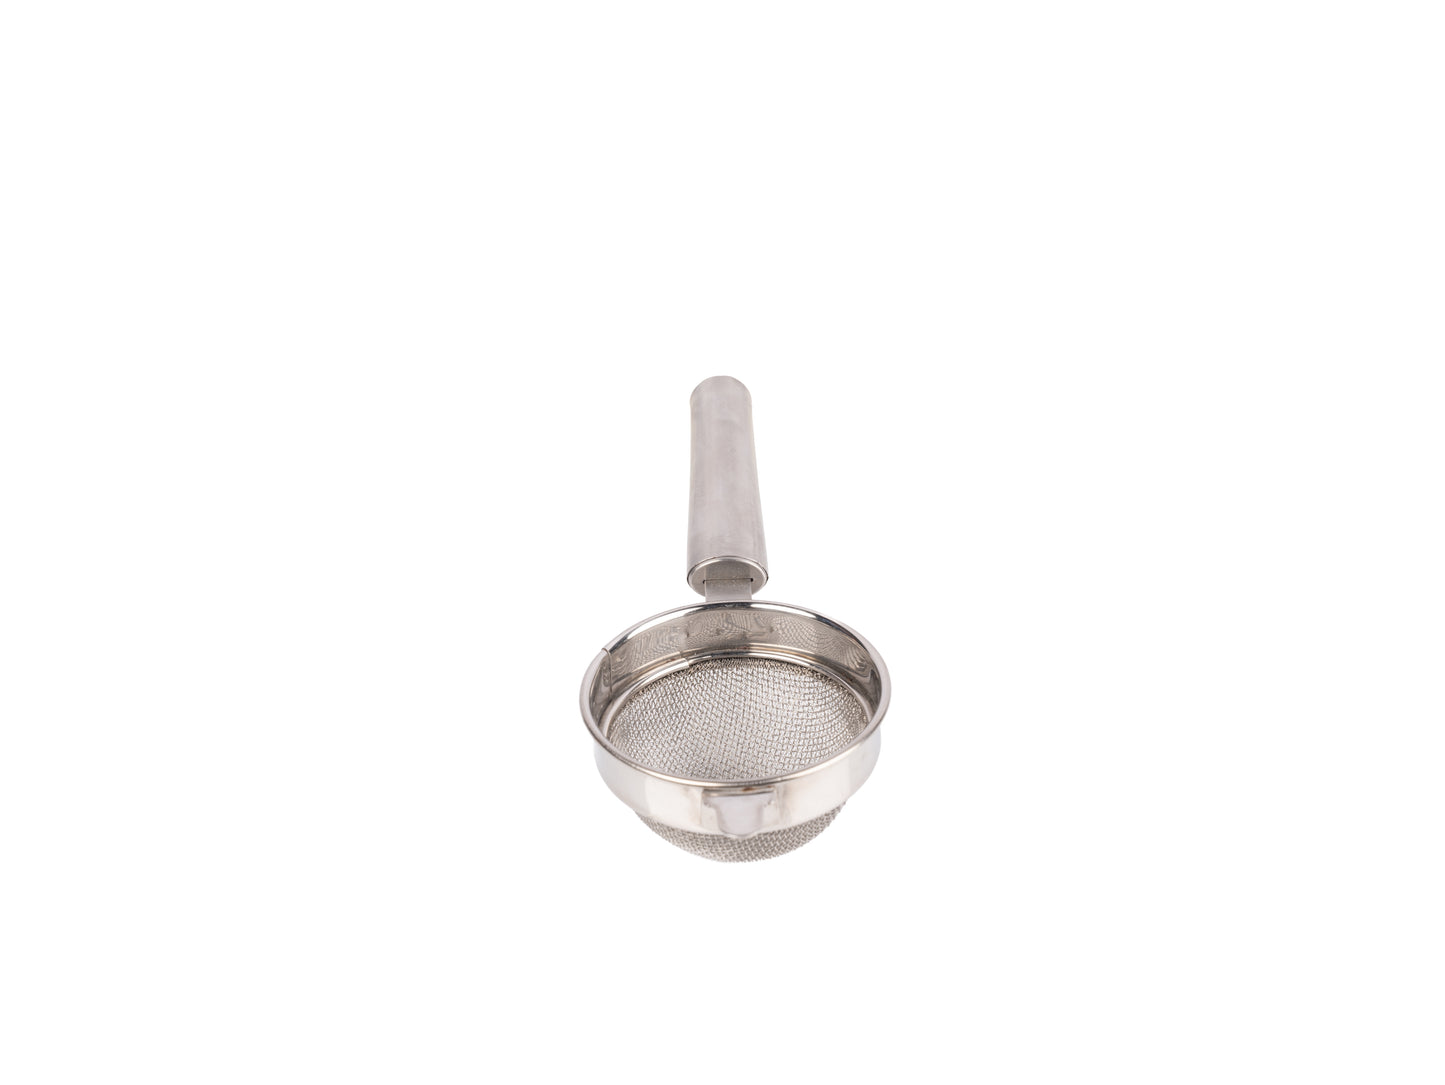 Basket Bum's Stainless Steel Chai Channi with Pipe Handle: Perfect Brewing Companions